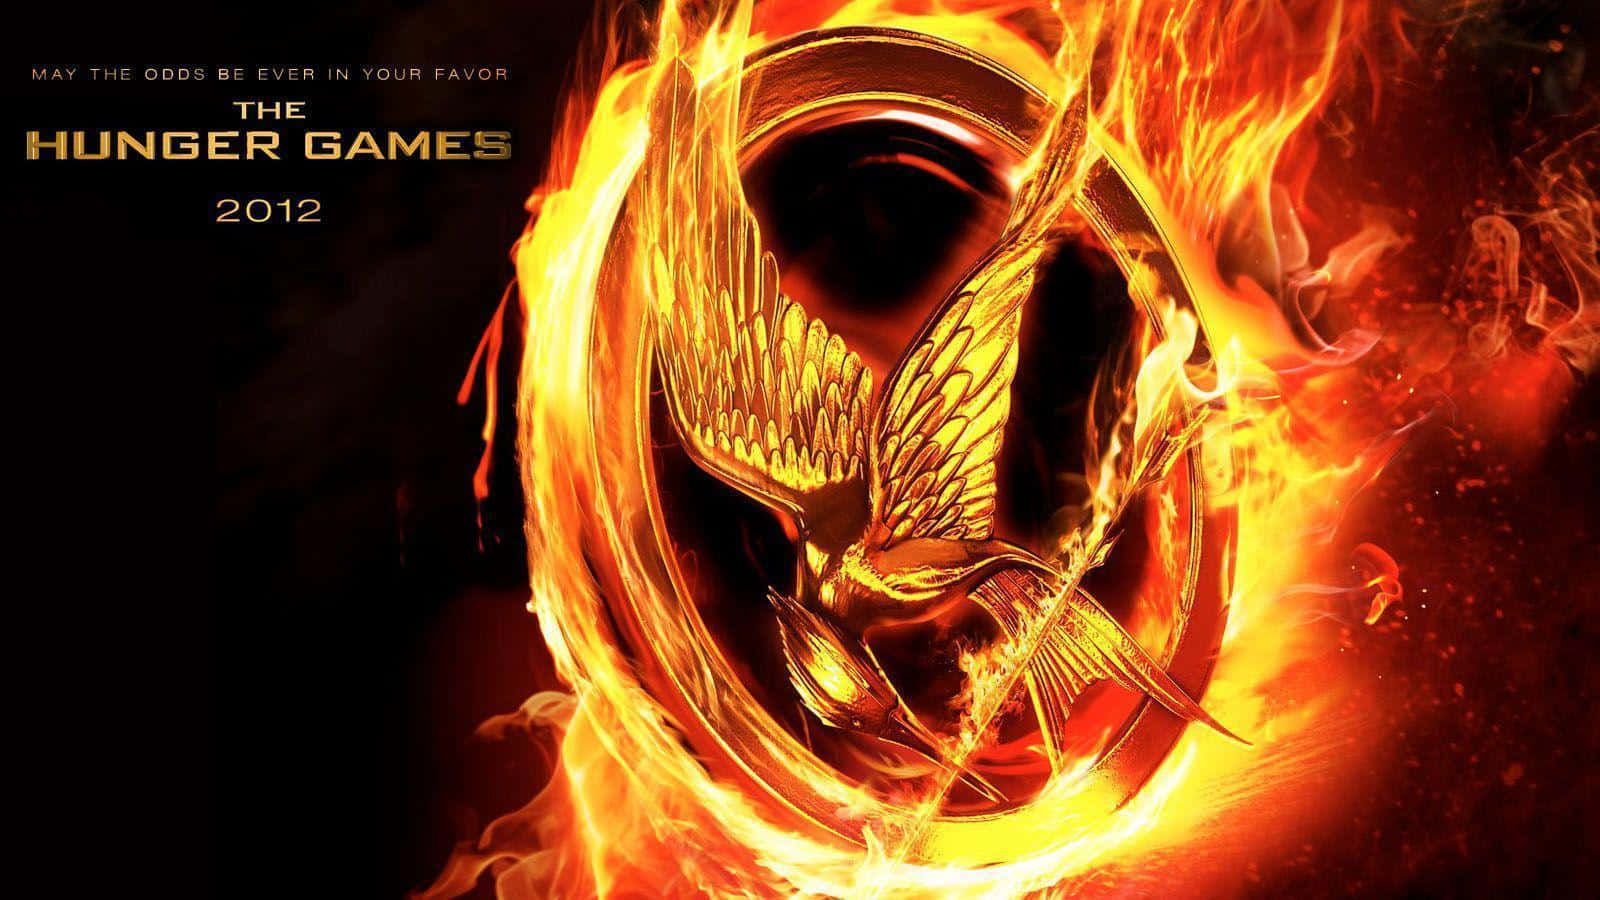 The Hunger Games Poster With A Firebird